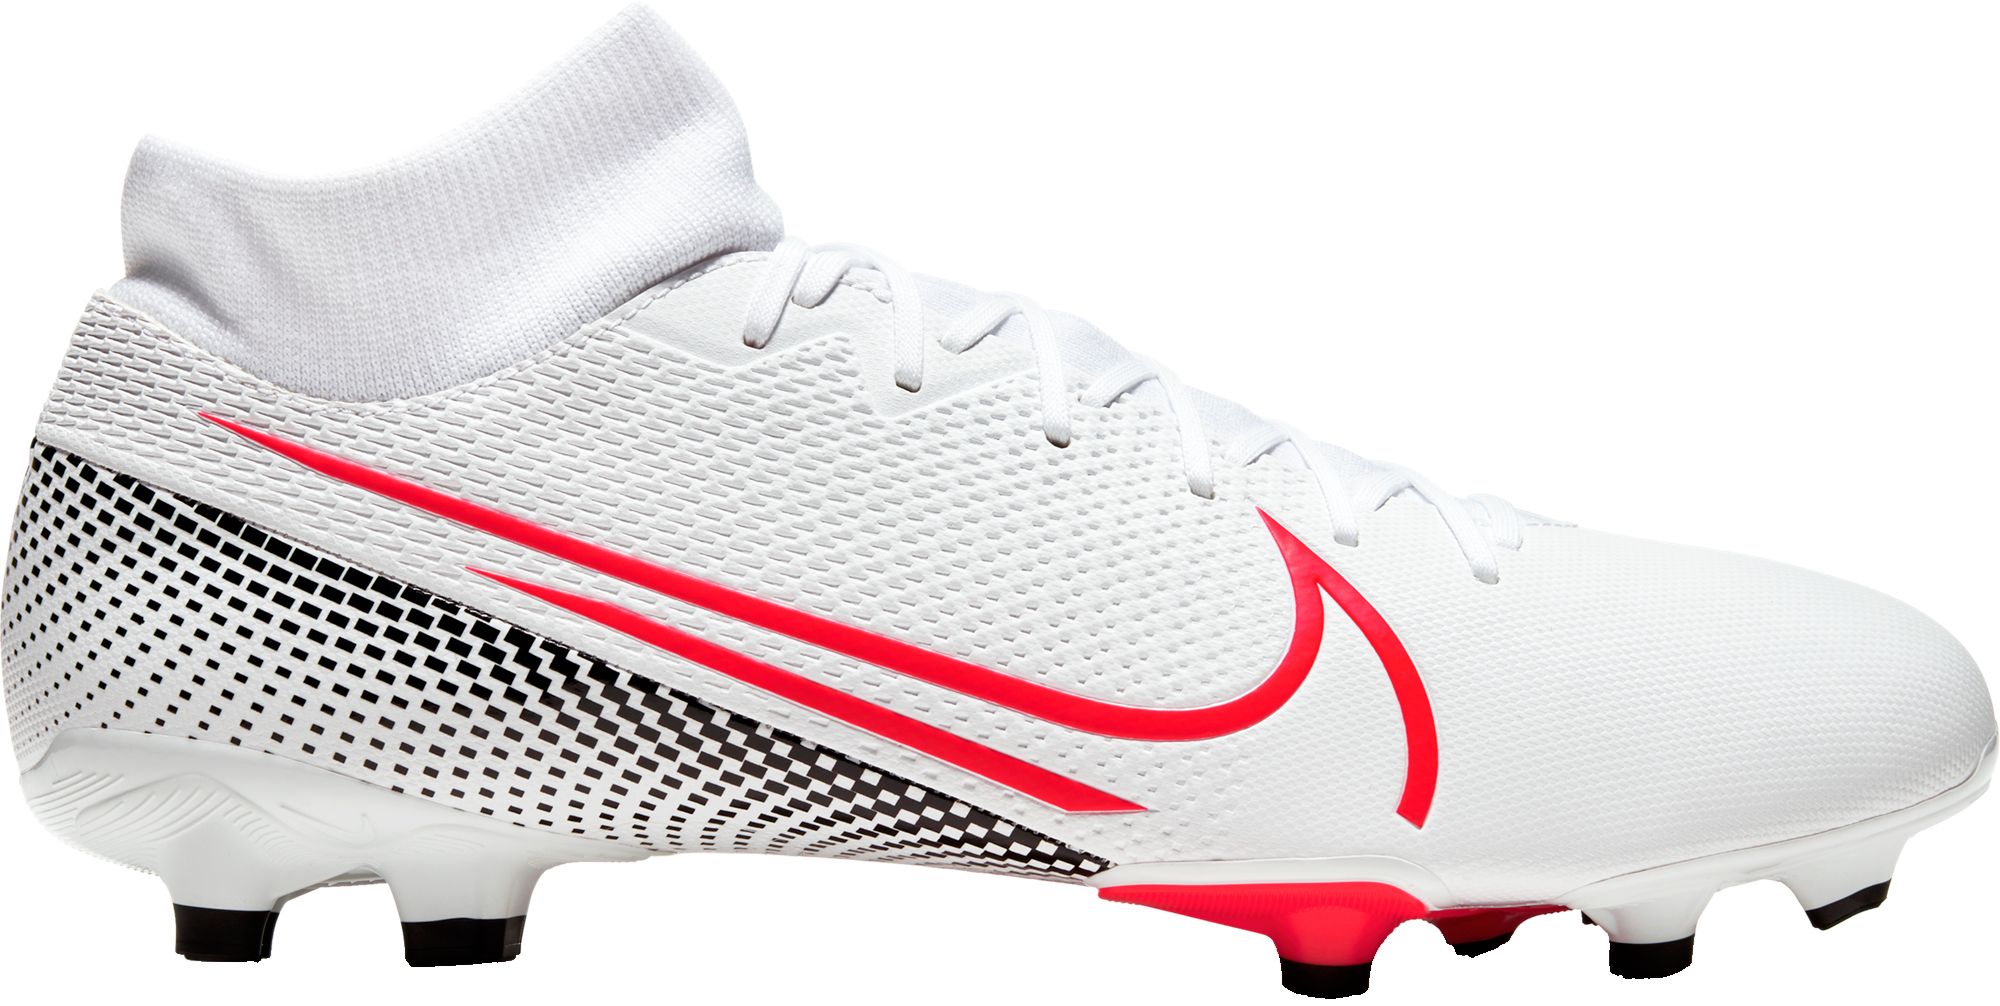 mercurial superfly 7 academy fg soccer cleats